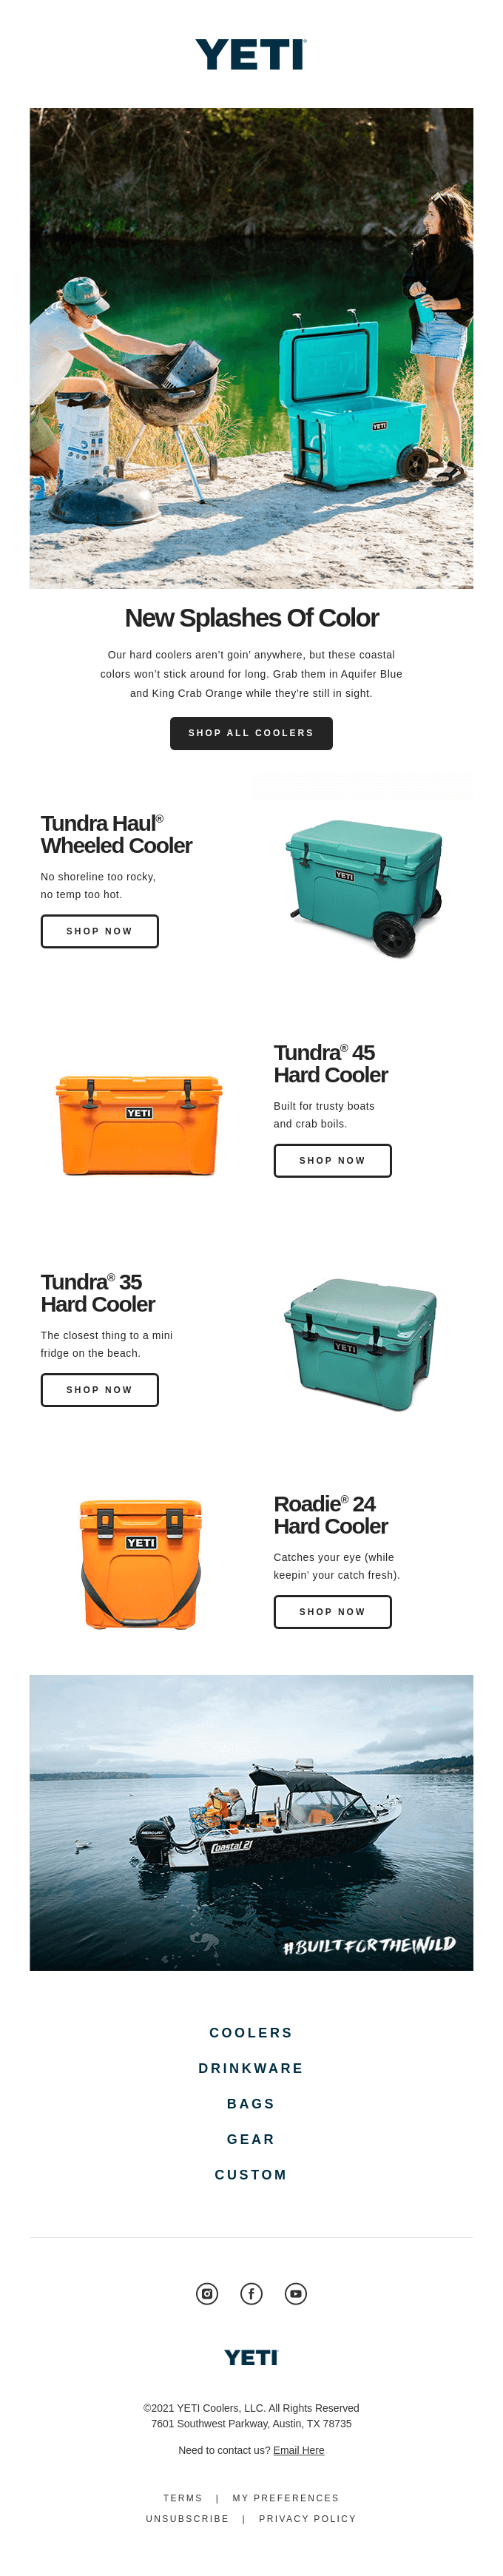 Just In: New Hard Cooler Colors